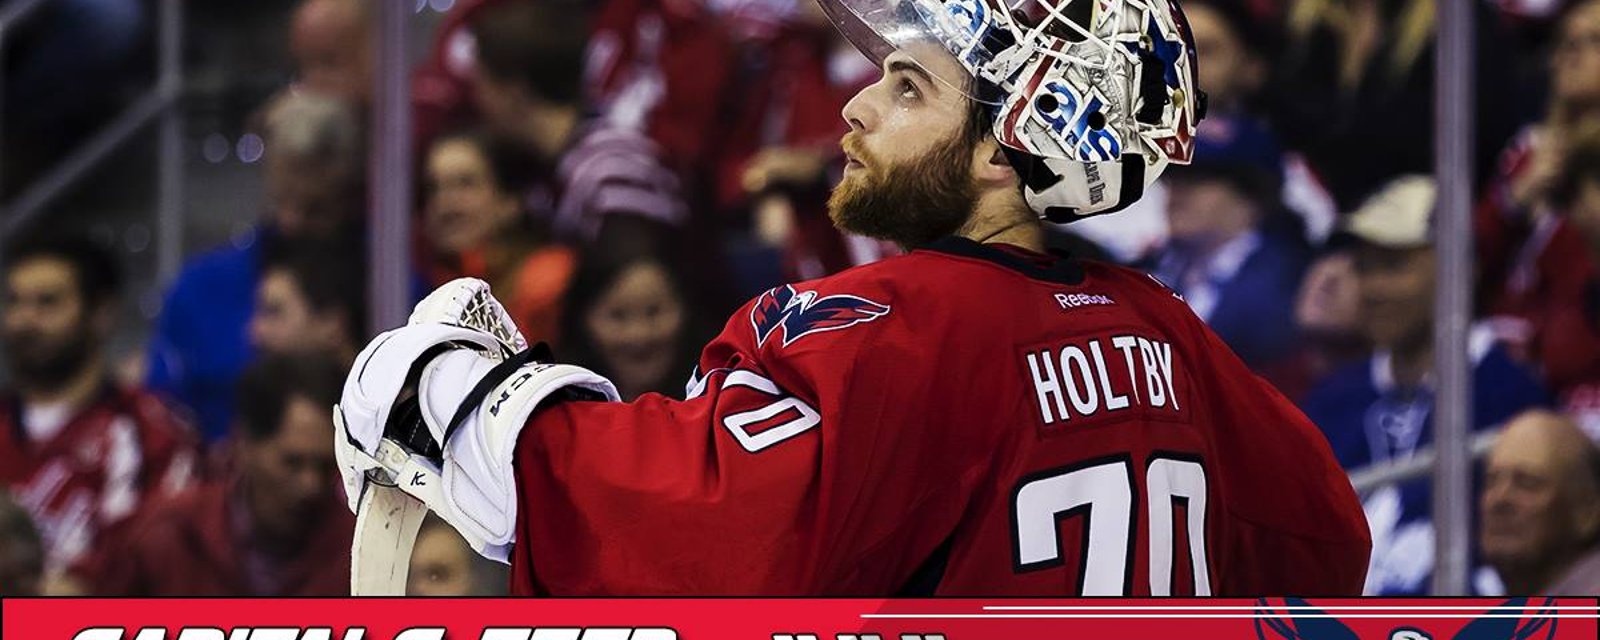 Barry Trotz's intriguing comments on Braden Holtby